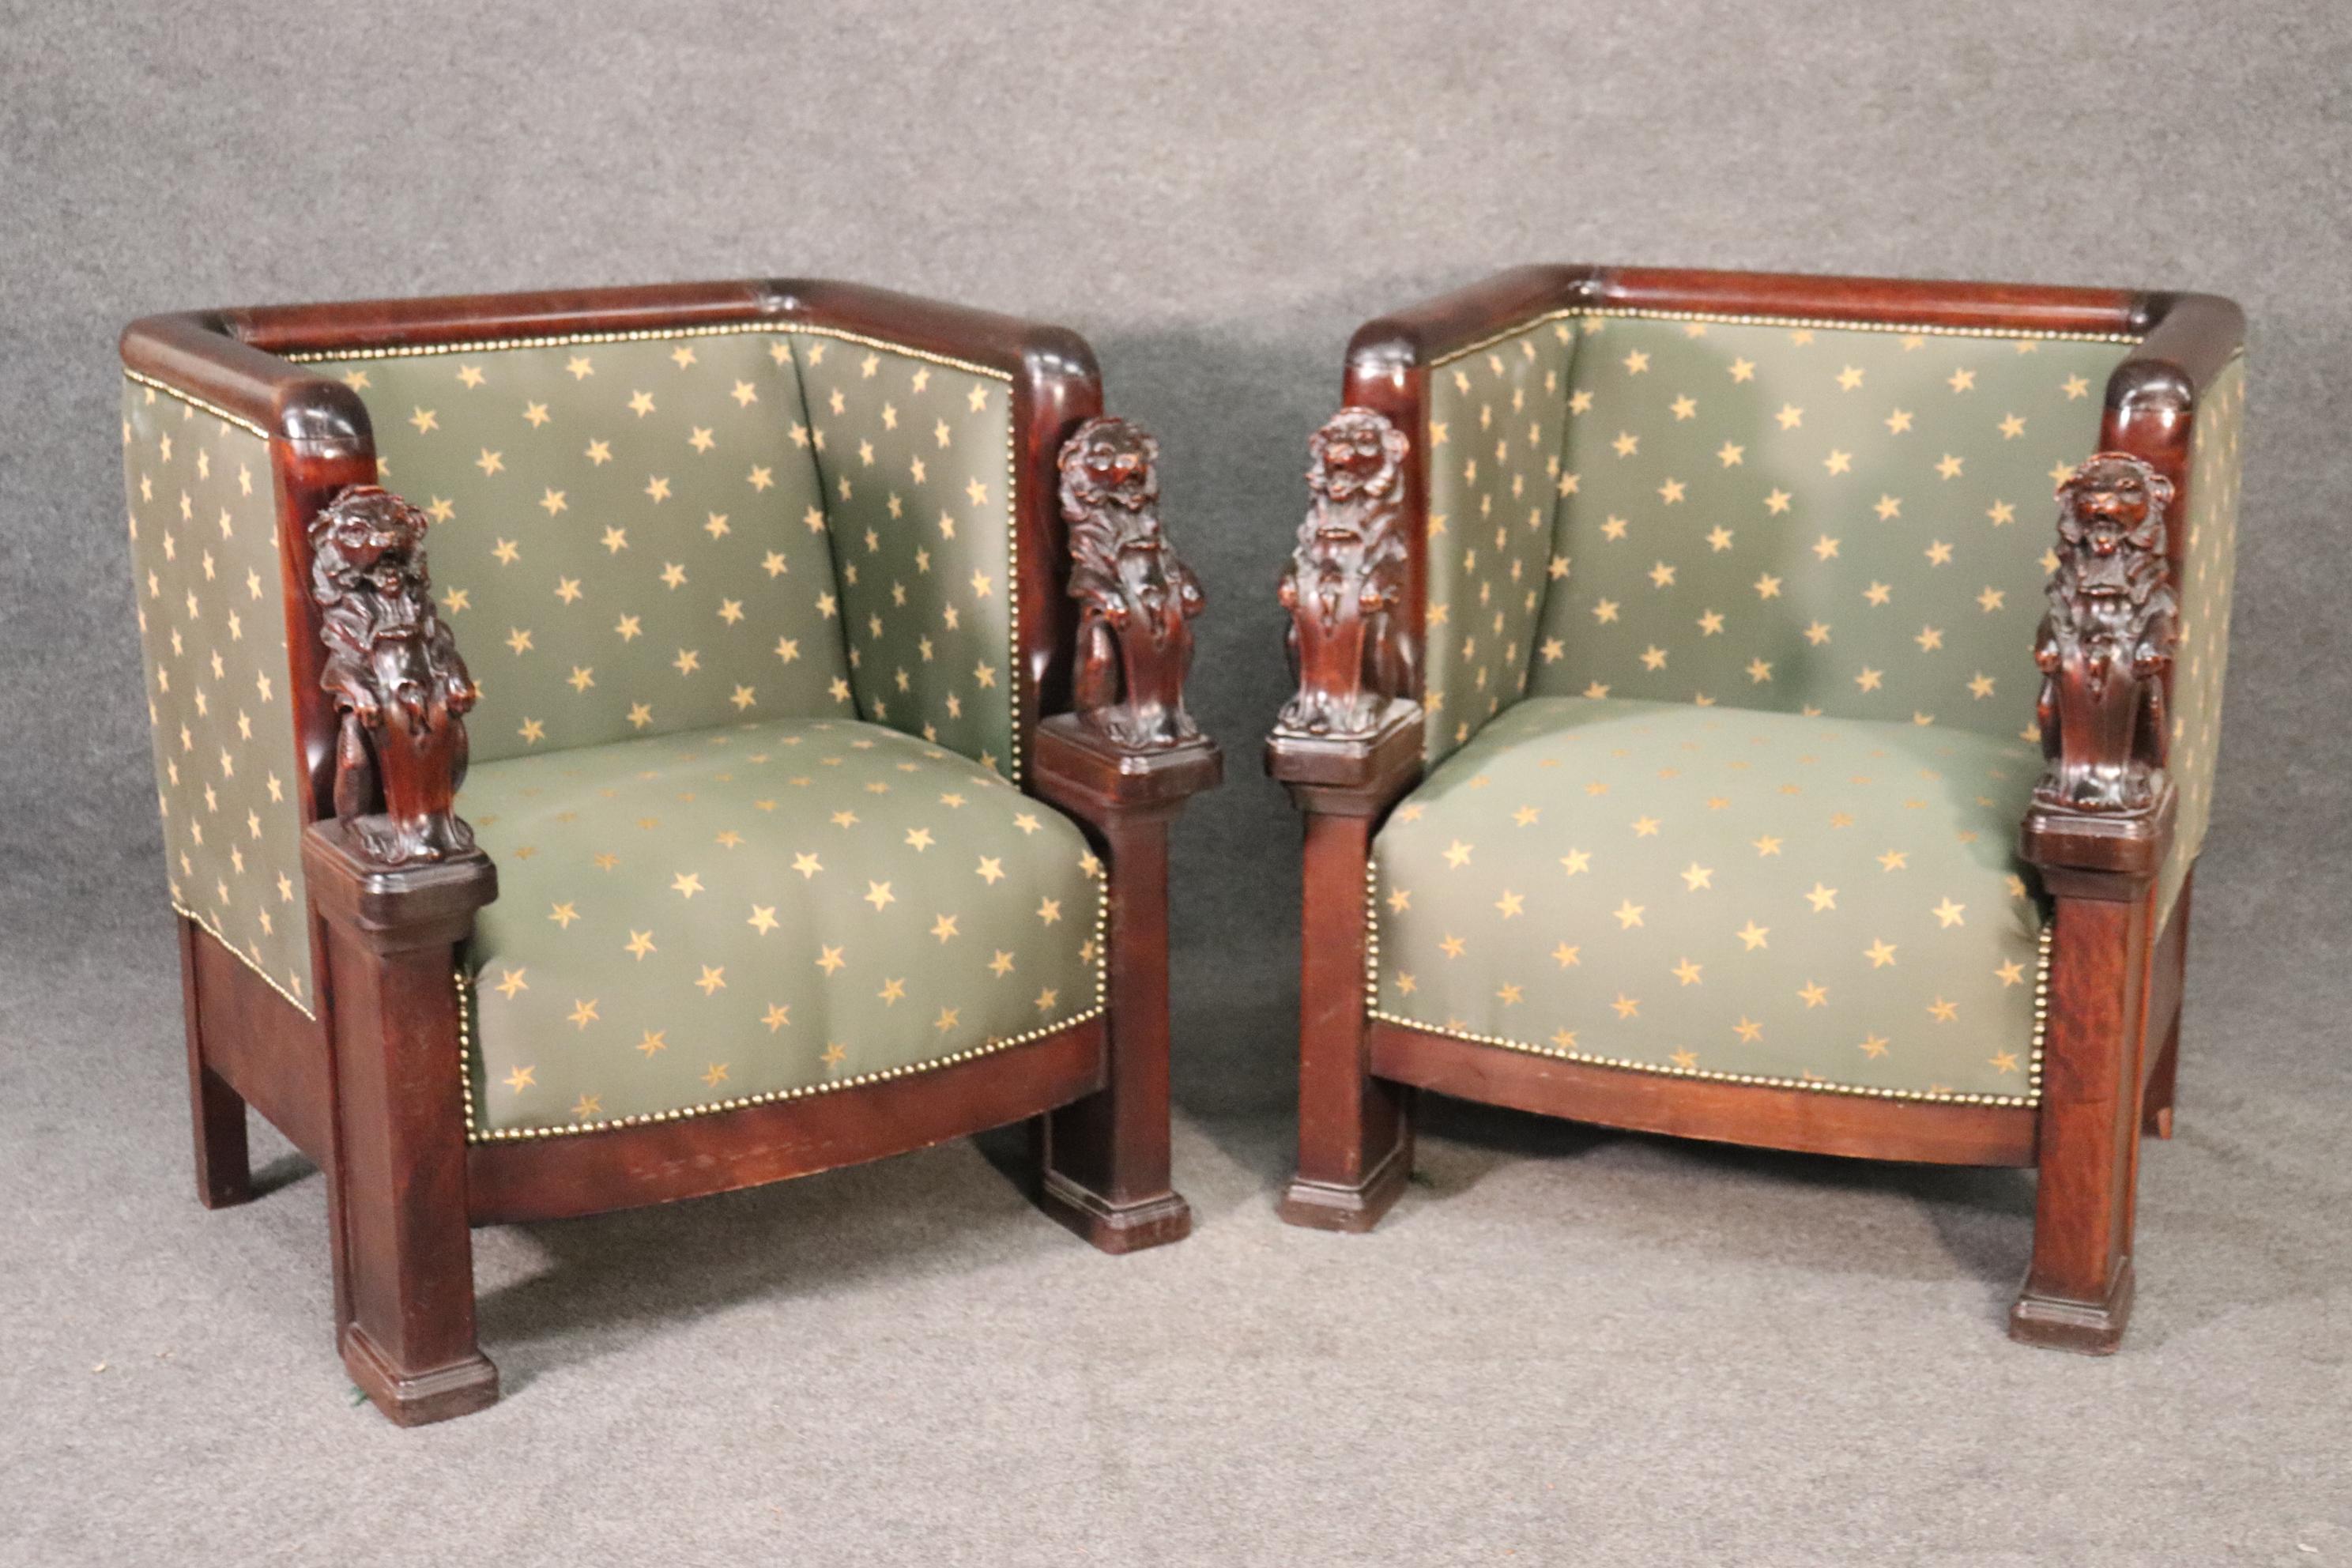 This is a stunning pair of French Empire throne chairs. They have incredible upholstery which is most likely silk and the carved full-standing lions are beautifully carved. There is a matching sofa exactly like these listed seperately. These chairs